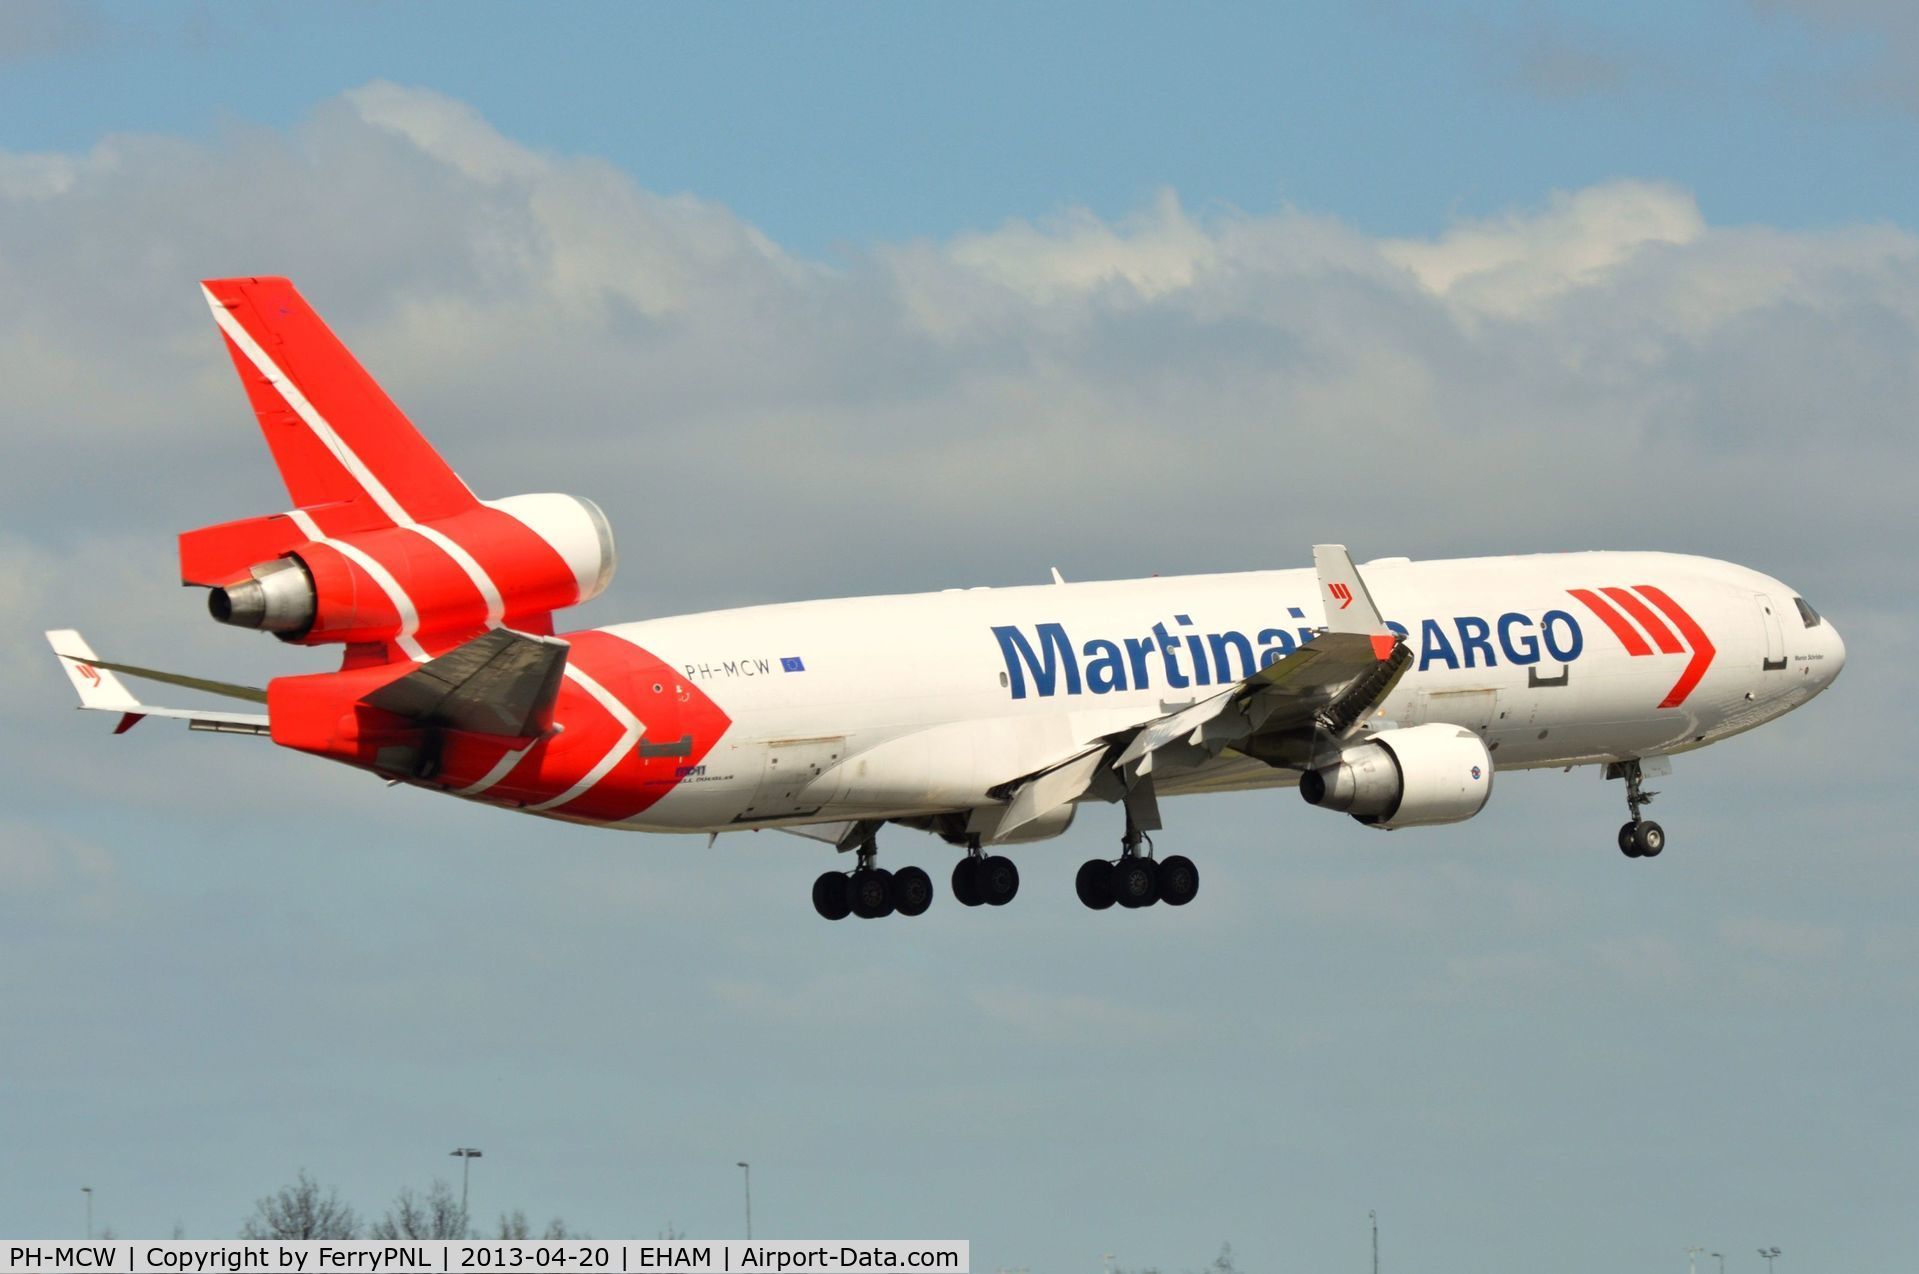 PH-MCW, 1998 McDonnell Douglas MD-11F C/N 48788, Martinair MD11 freighter landing in AMS